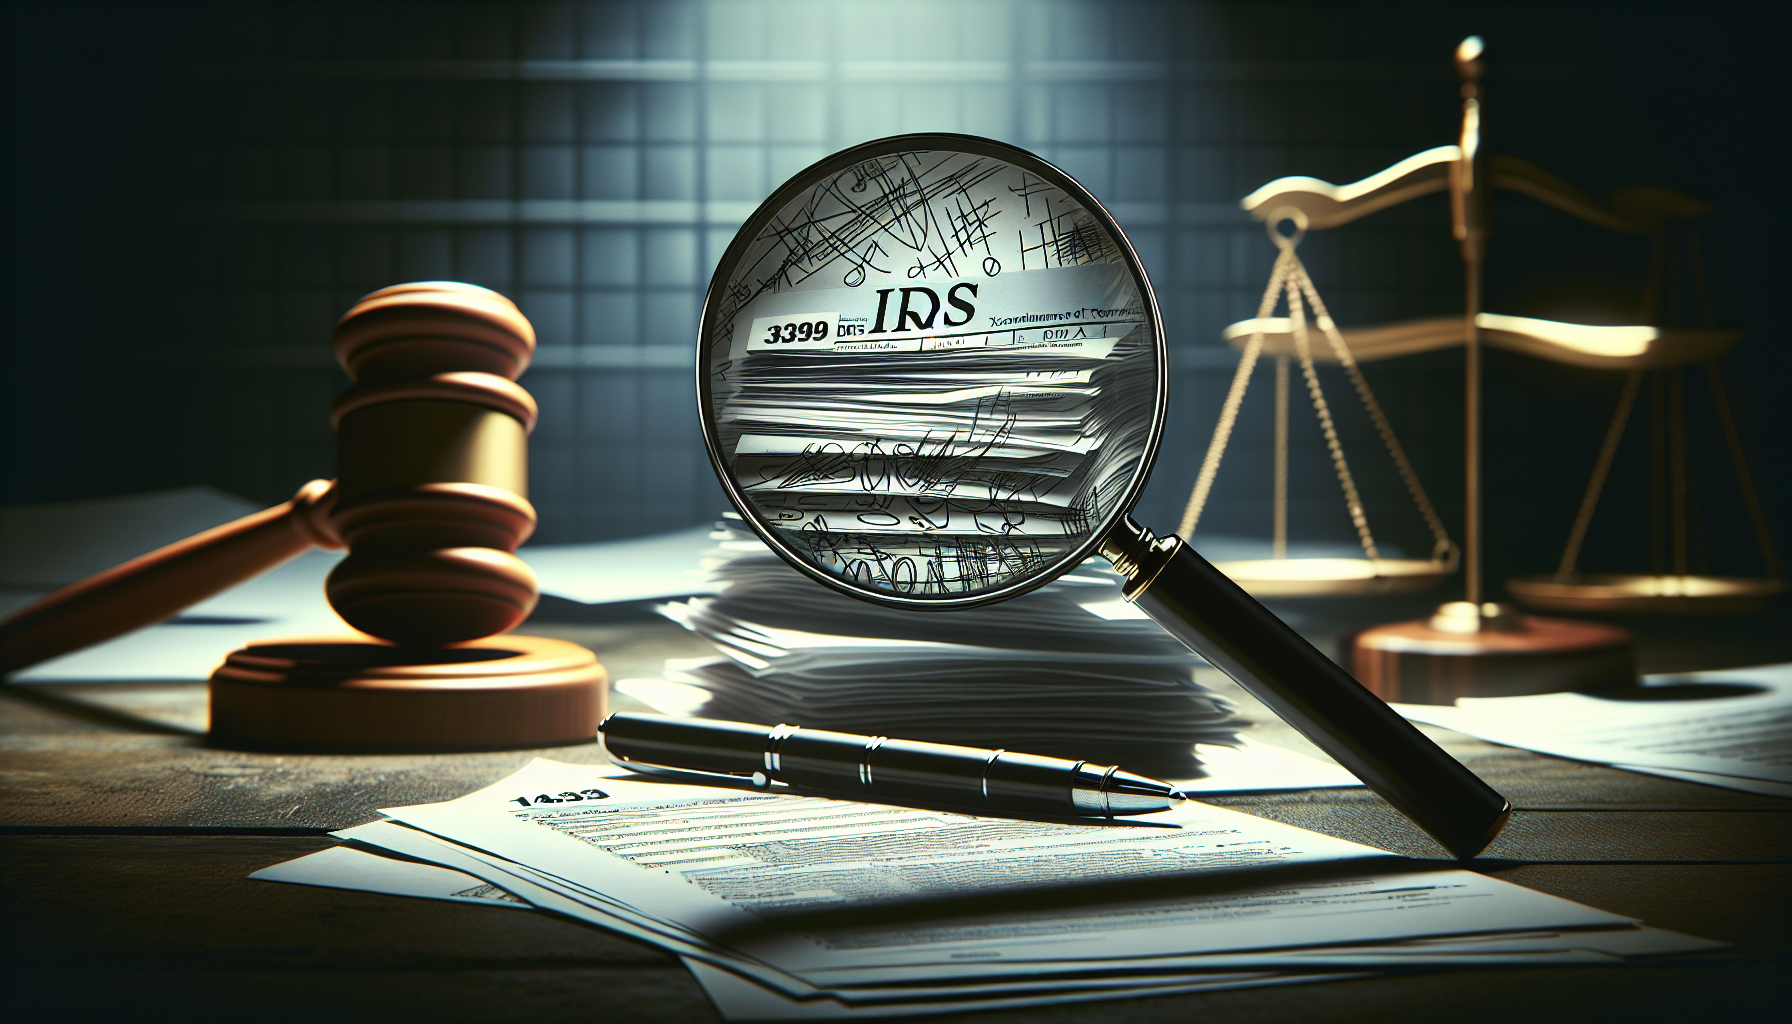 Illustration of a magnifying glass over IRS tax forms